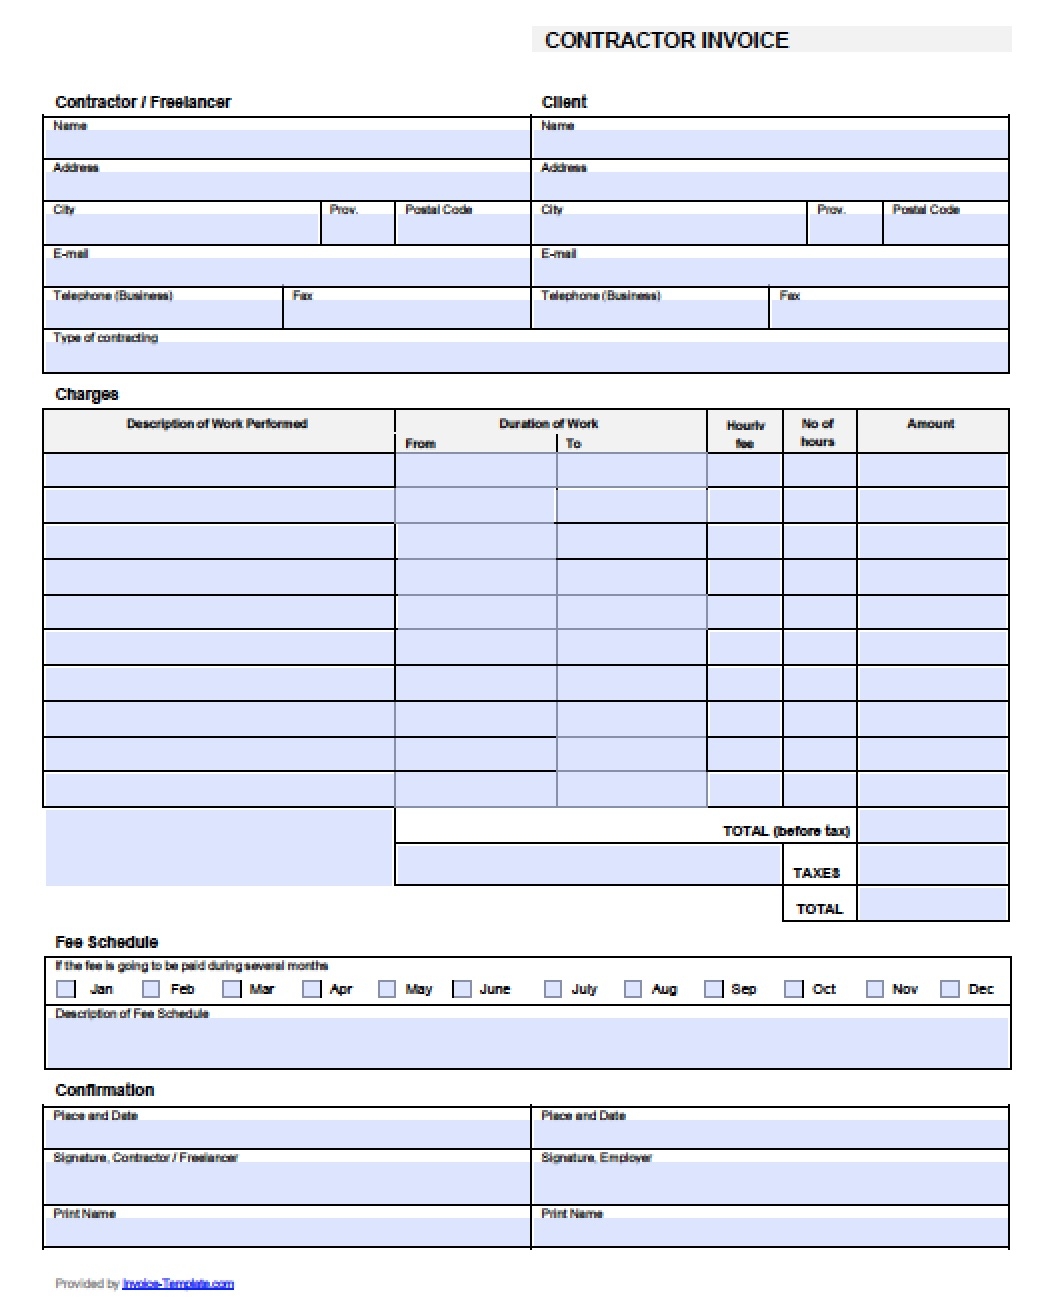 free contractor invoice template excel pdf word doc contractor invoice template free